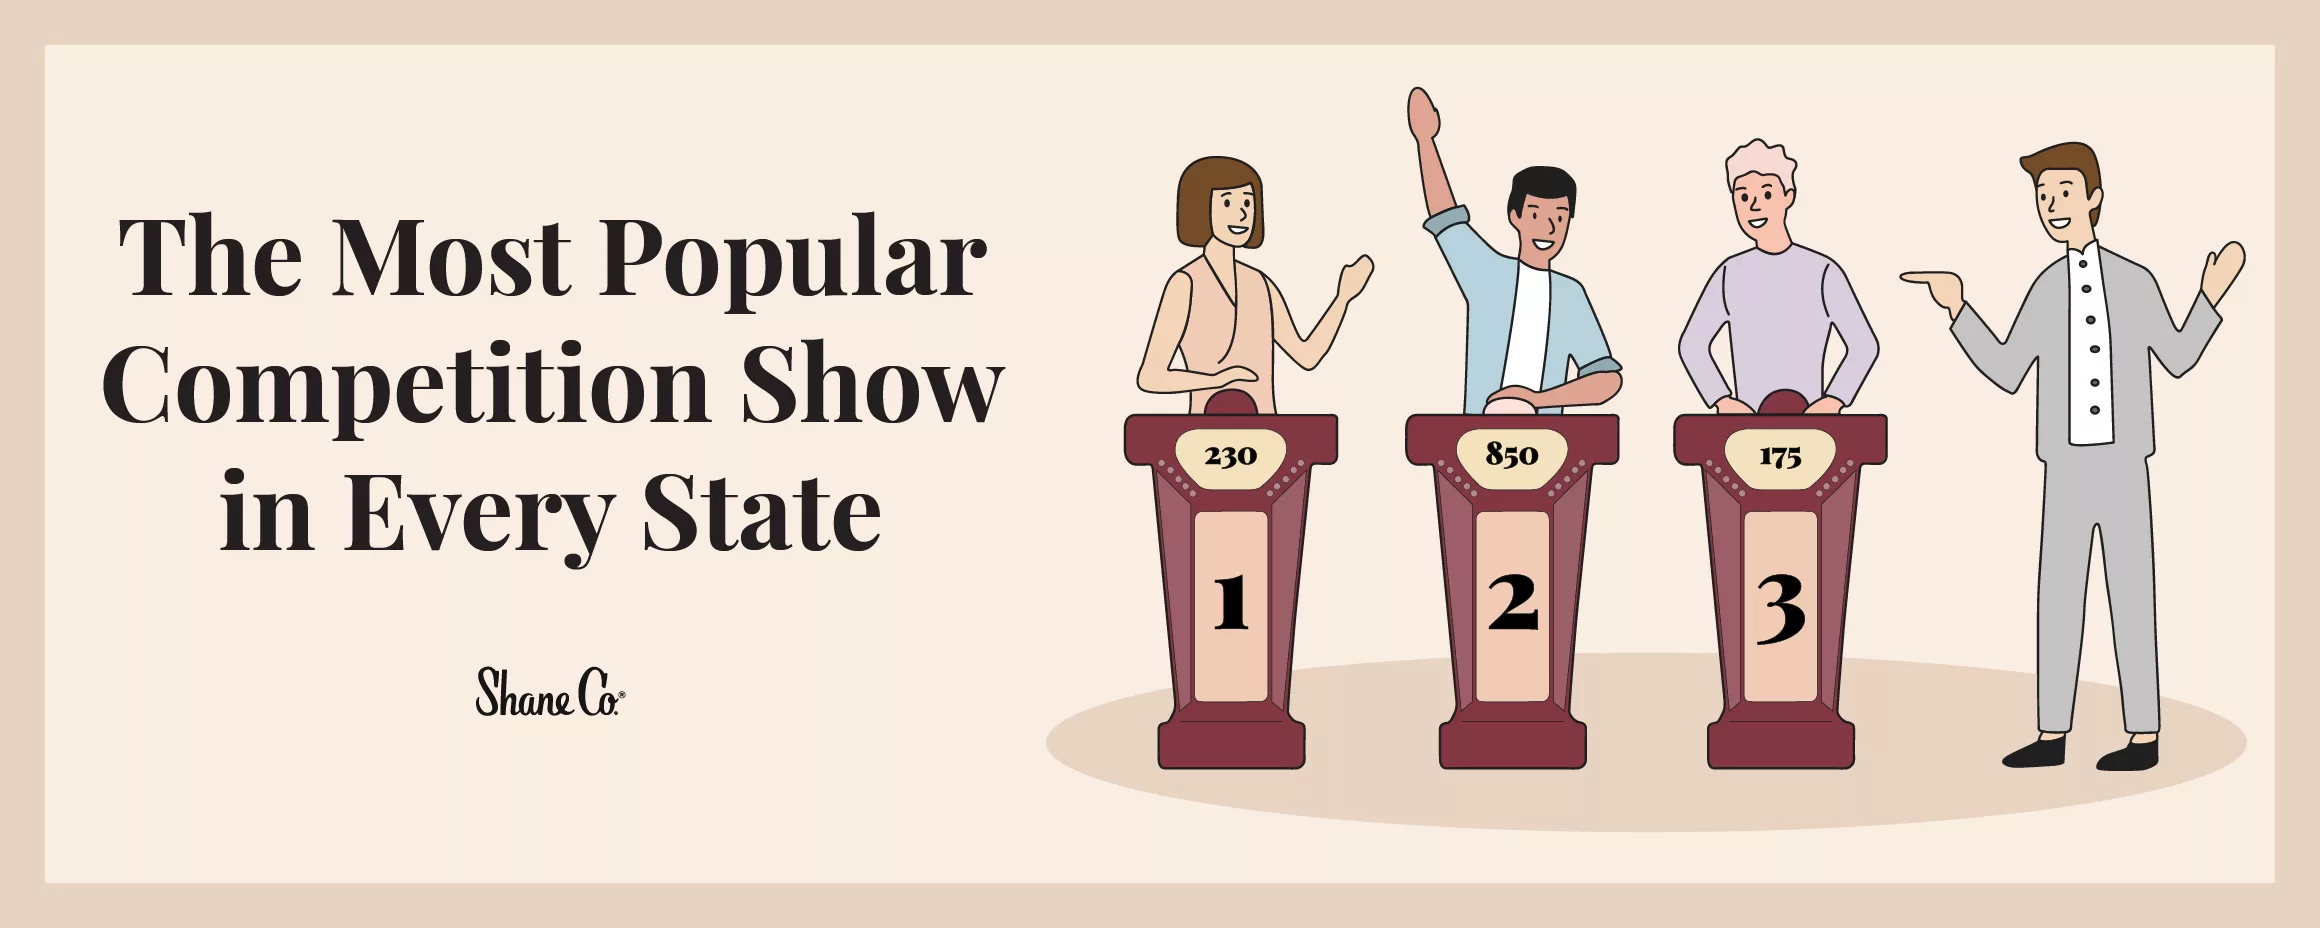 Introductory graphic for a blog about the most popular competition shows in the U.S.